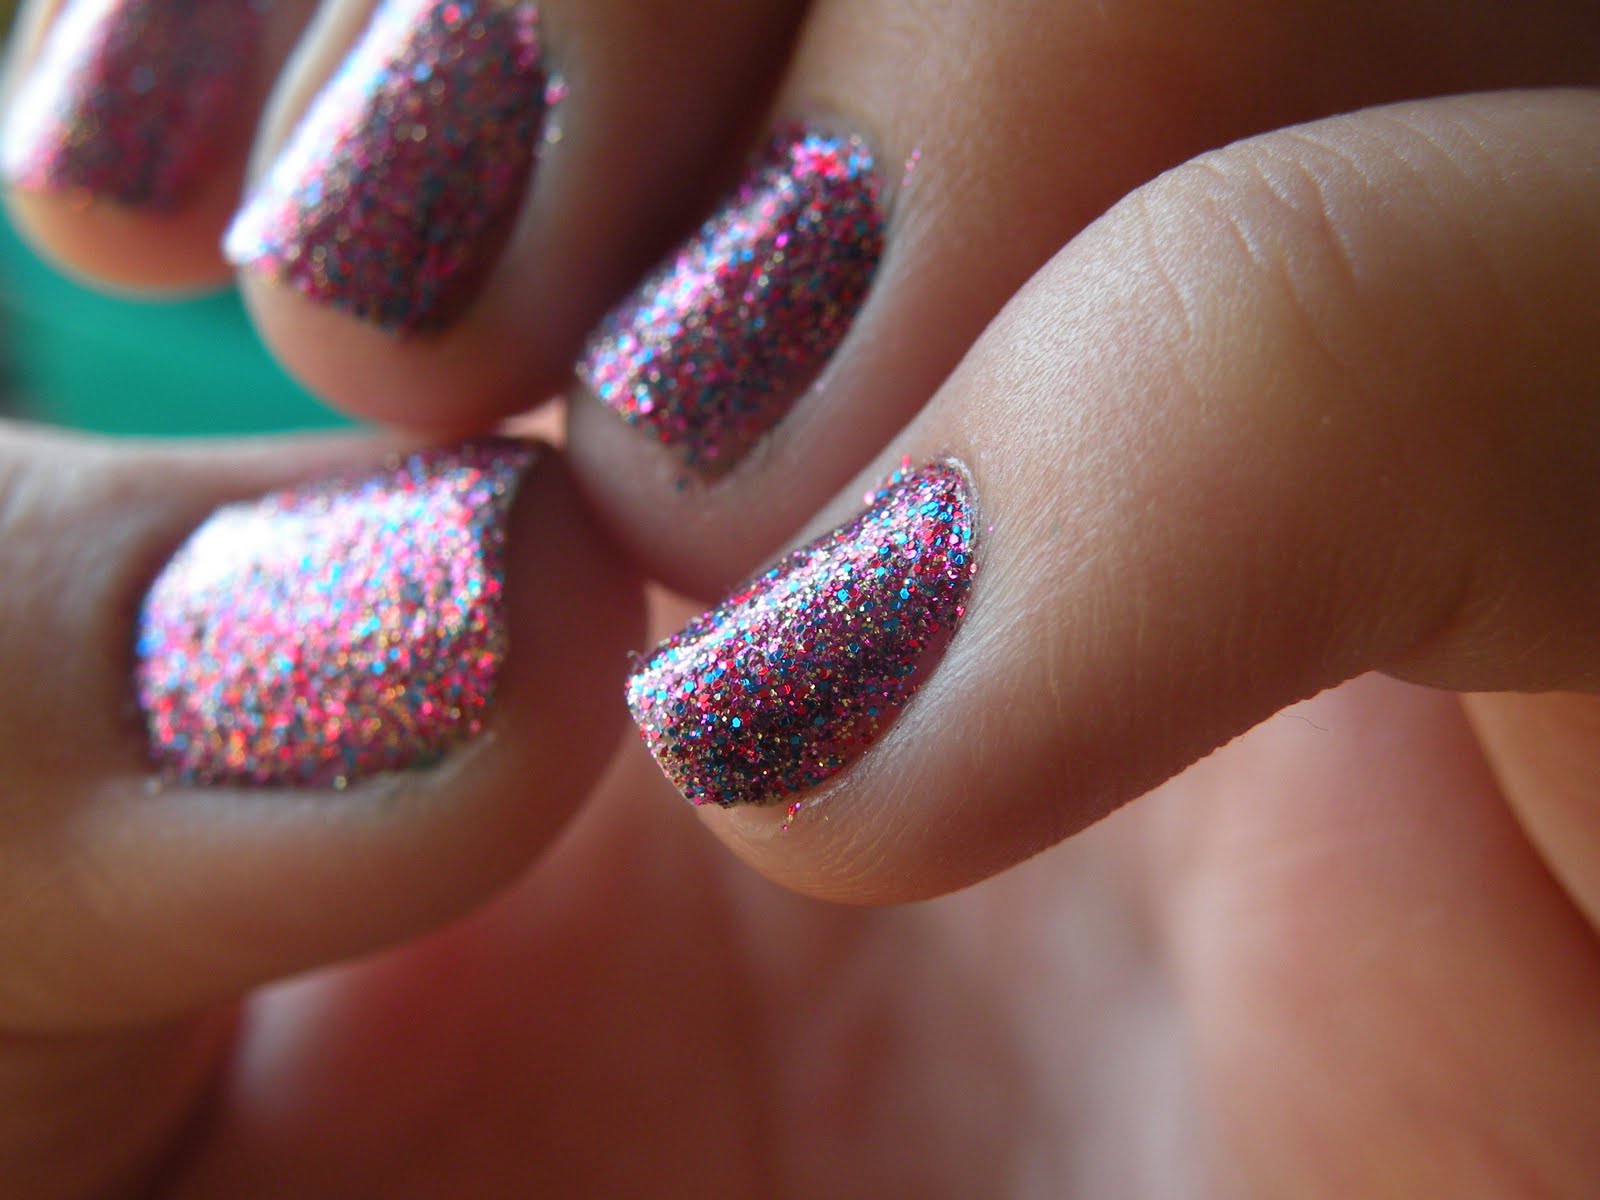 4. Solid Color Nail Art with Glitter - wide 4